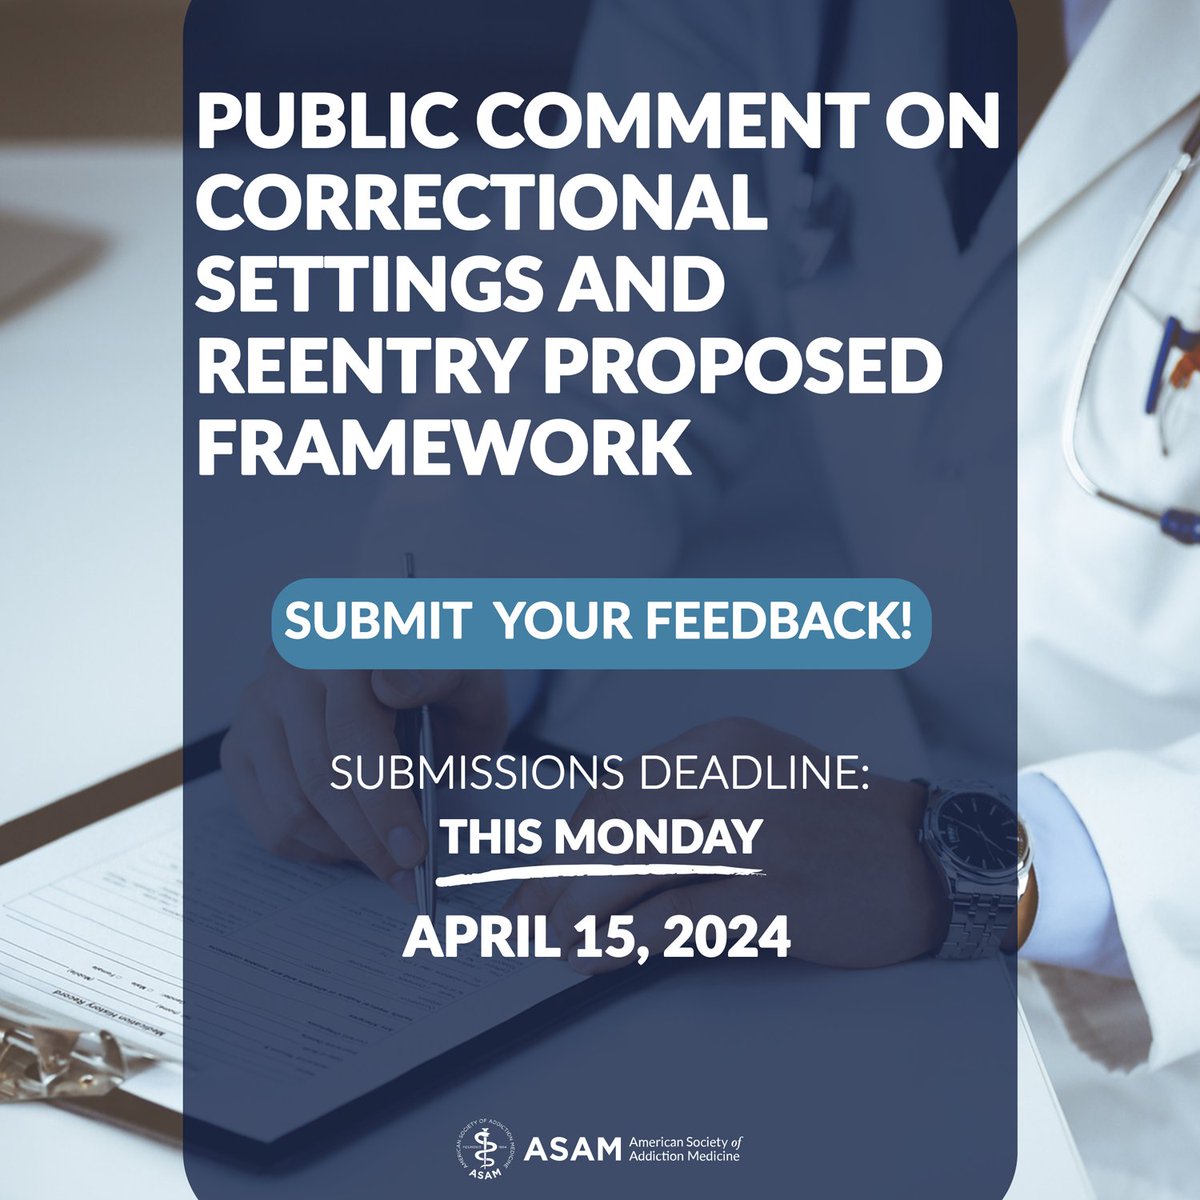 Submit your feedback now >> ow.ly/jsiM50R5Cab #ASAM #AddictionMedicine #ASAMCriteria #AddictionTreatment